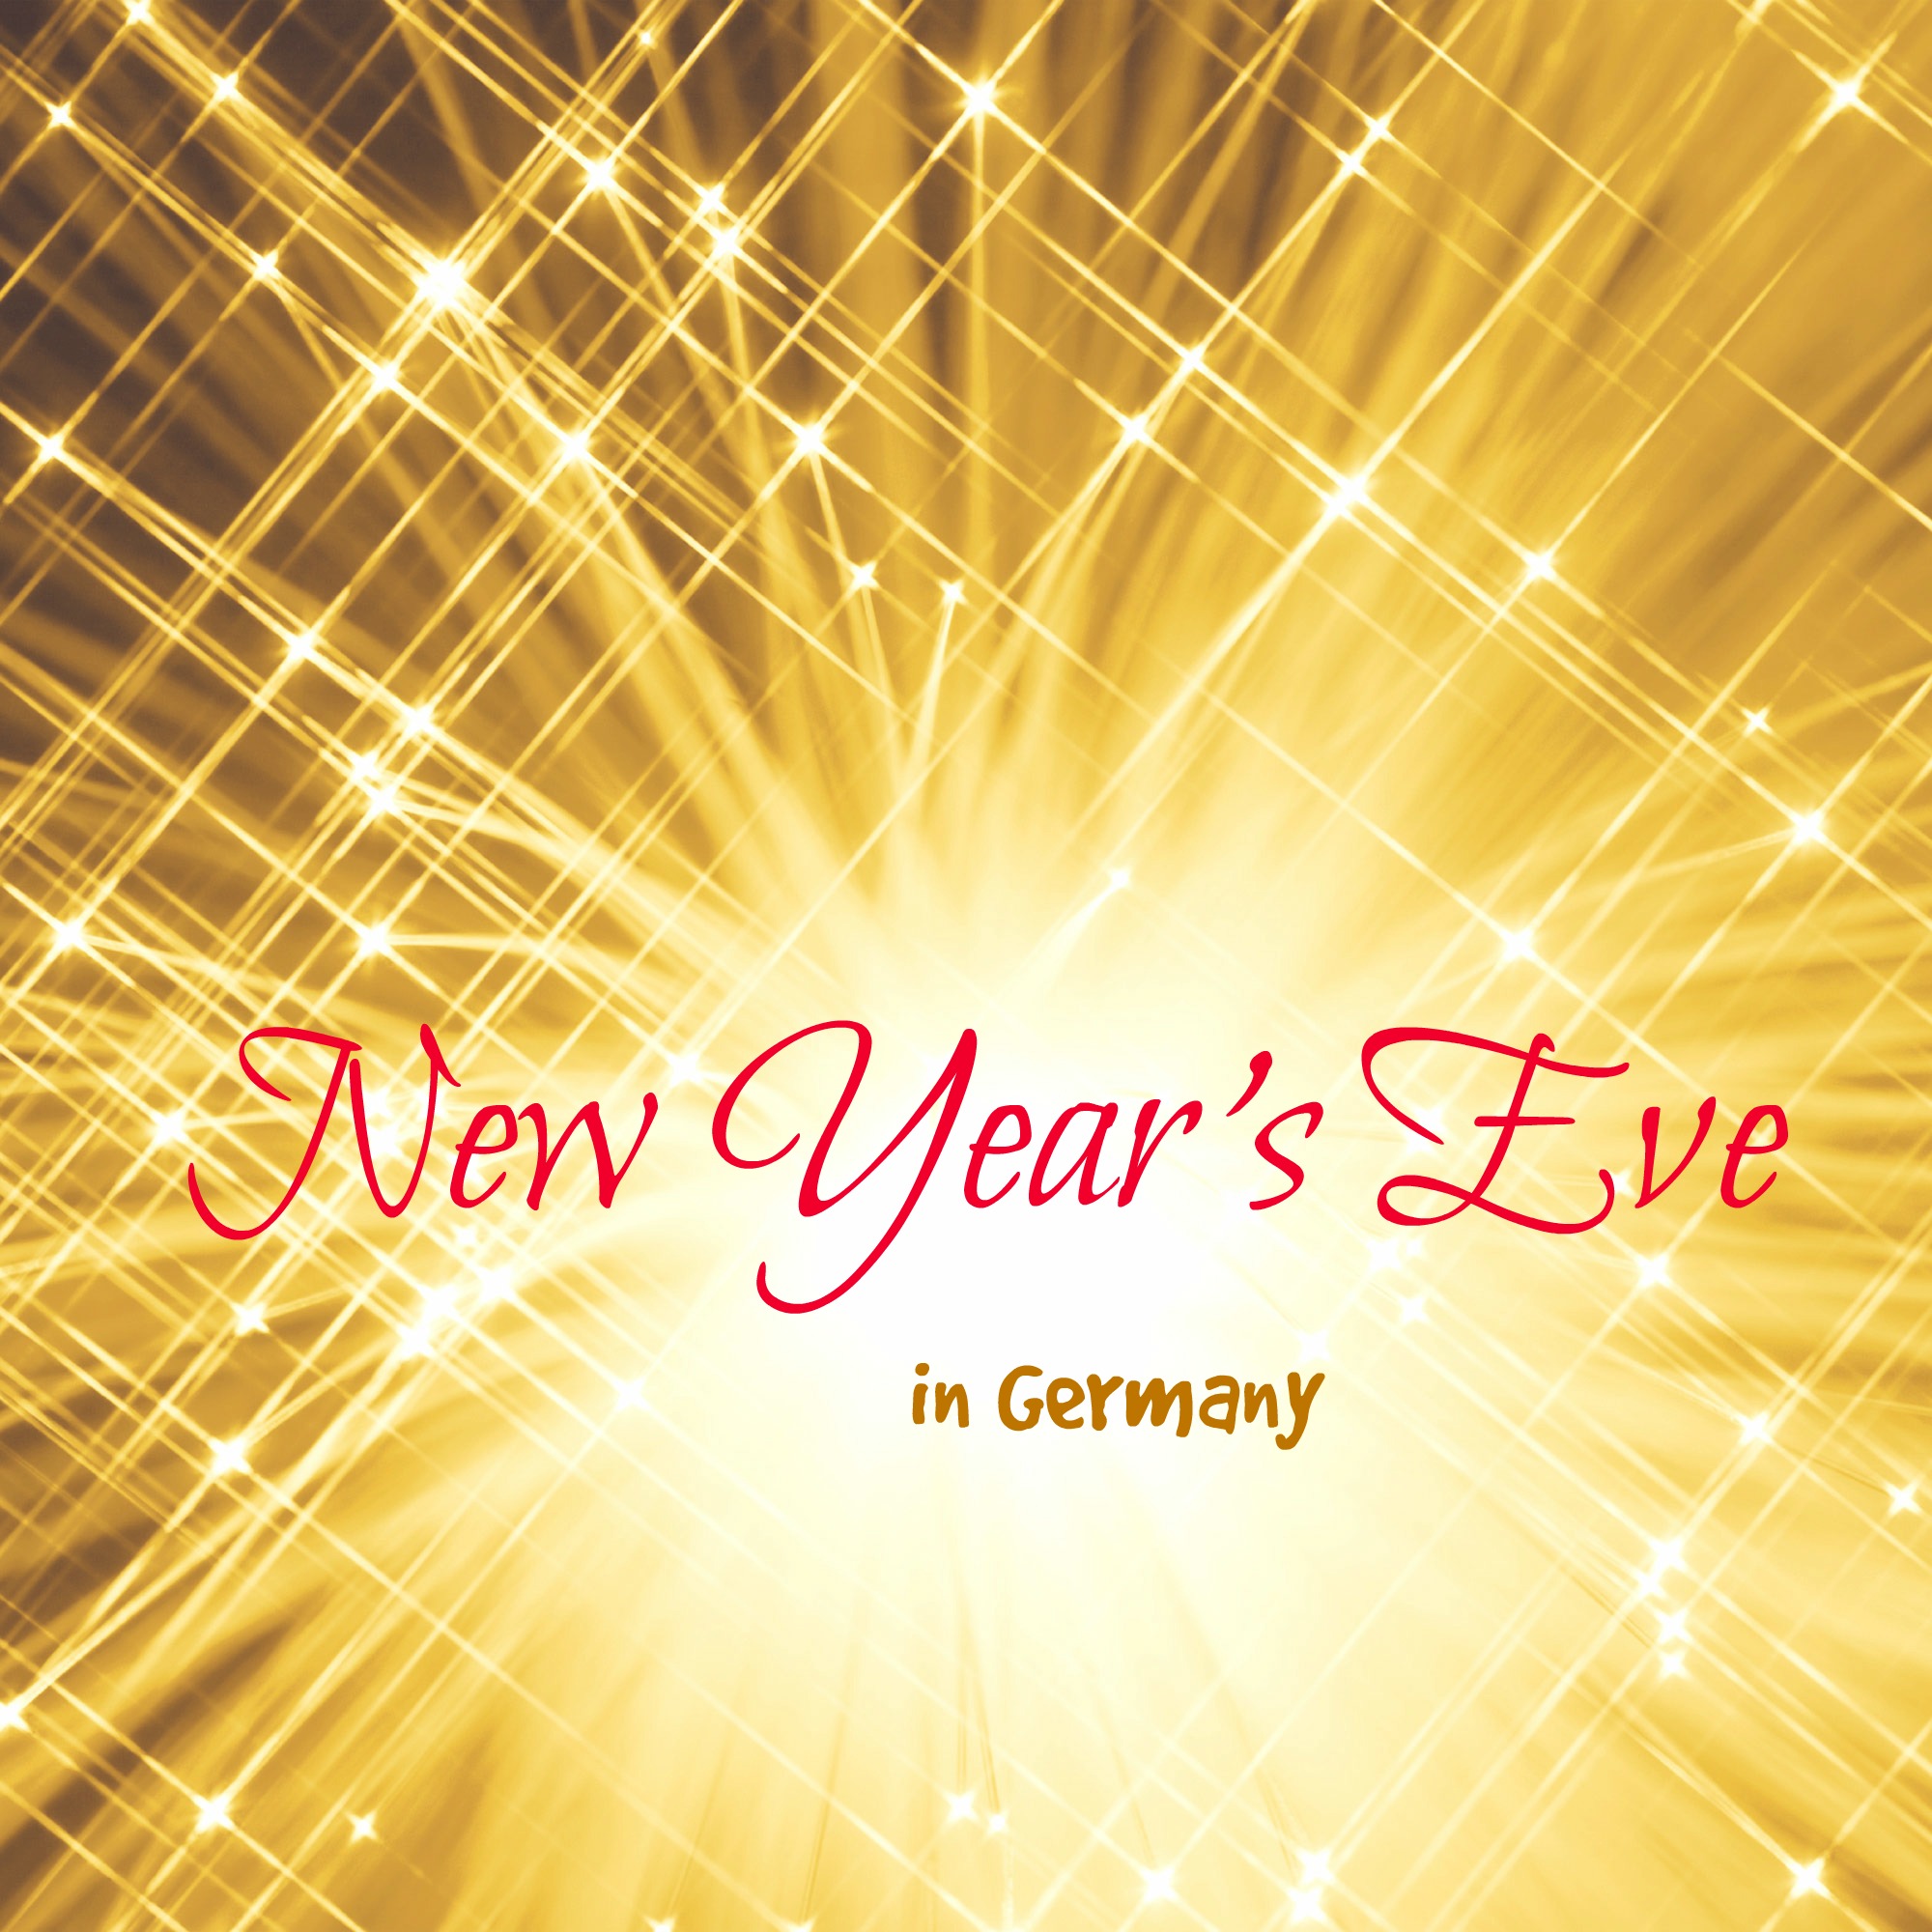 Learn about New Year's Eve traditions in Germany.